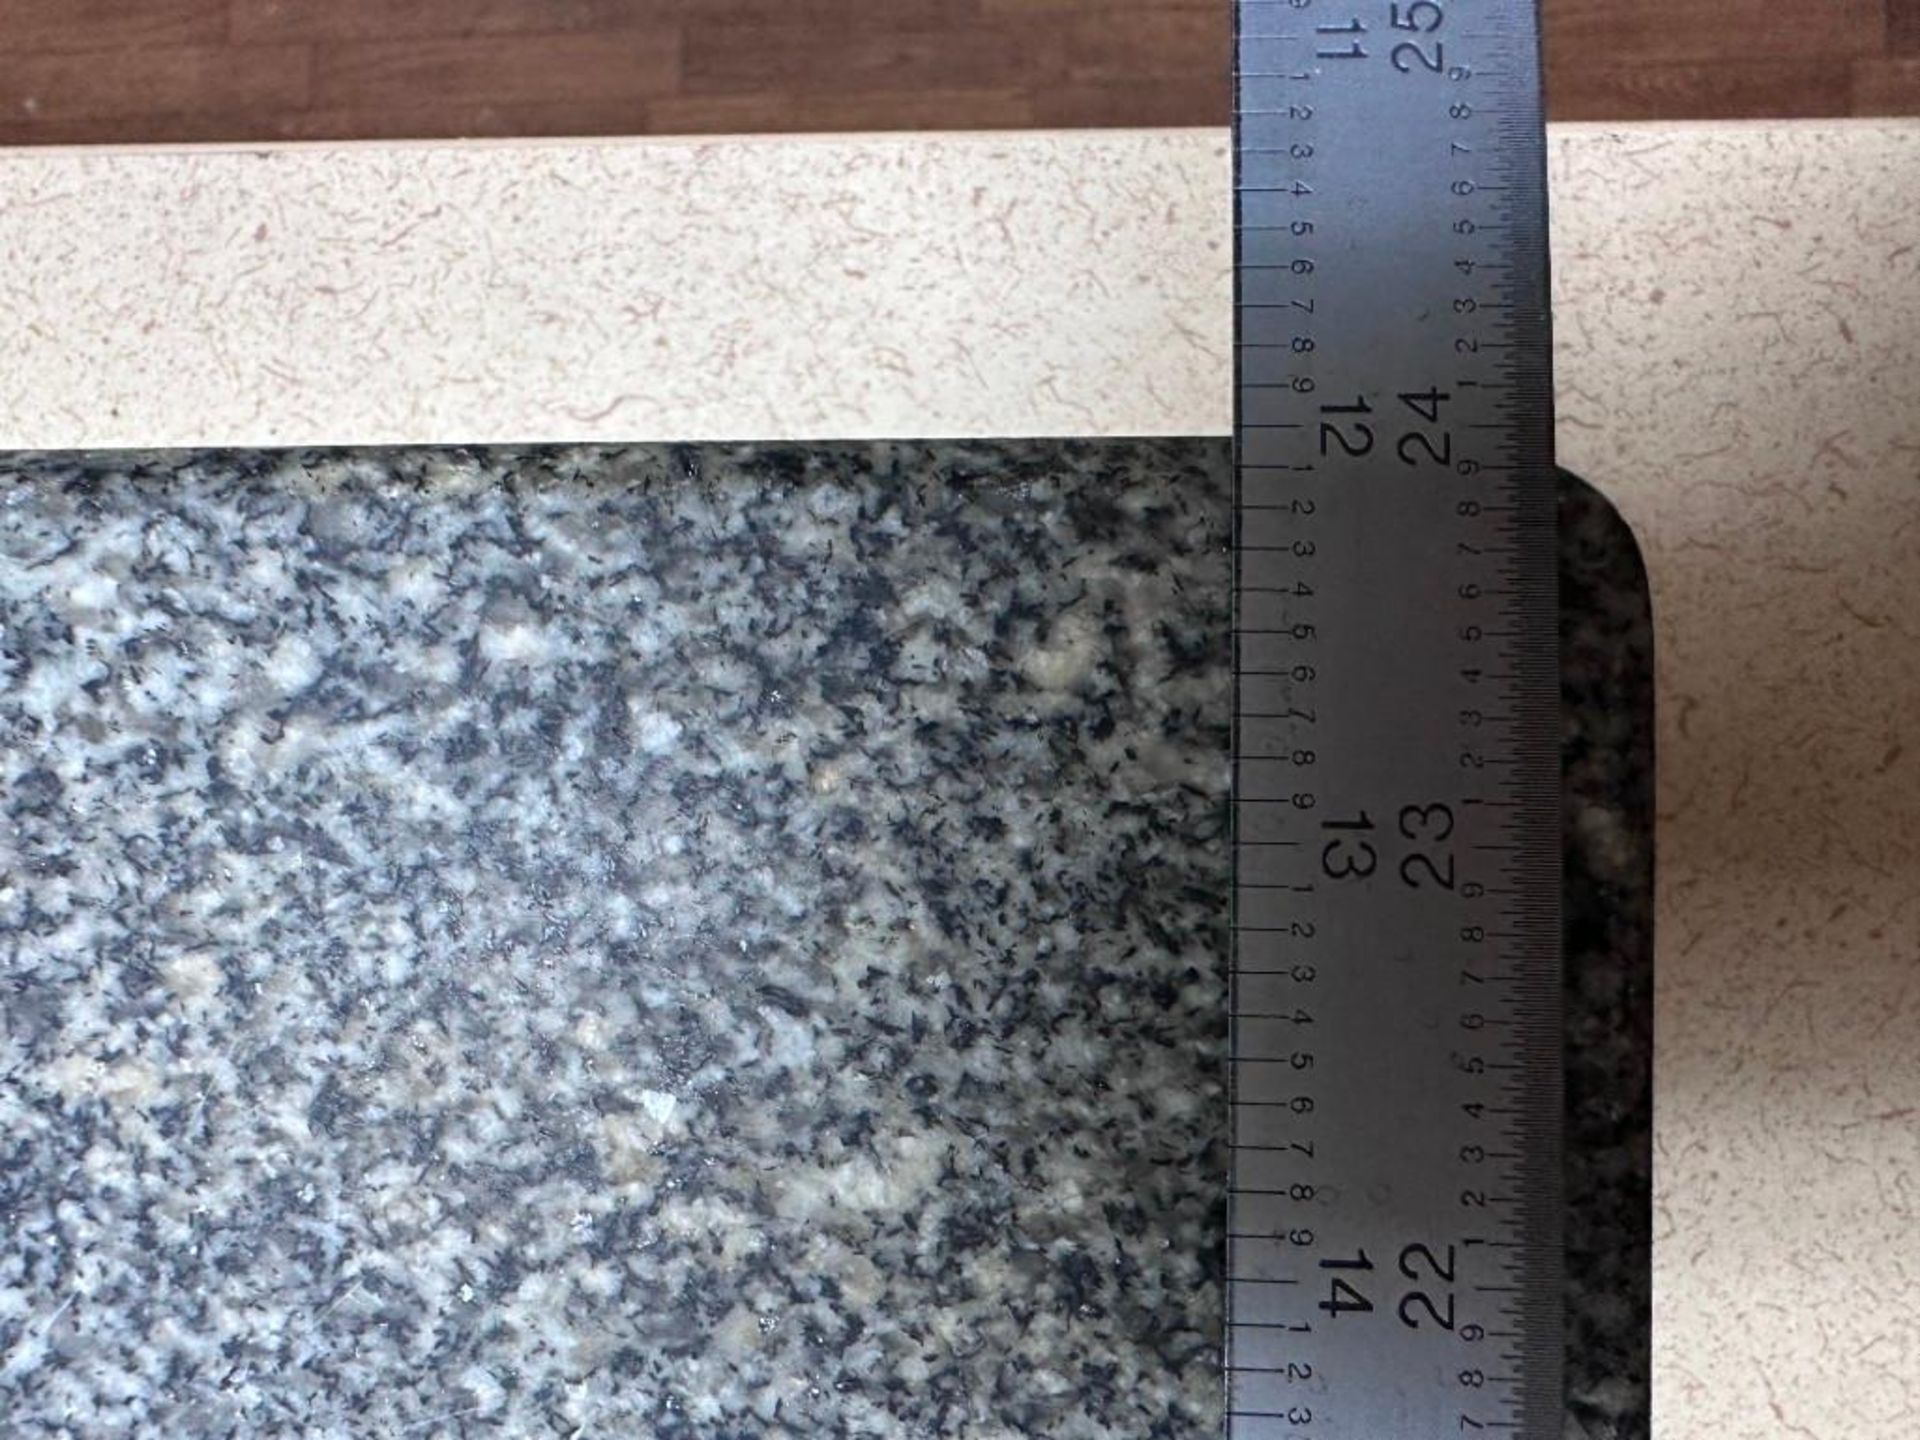 GRANITE SURFACE INSPECTION PLATE - Image 4 of 6